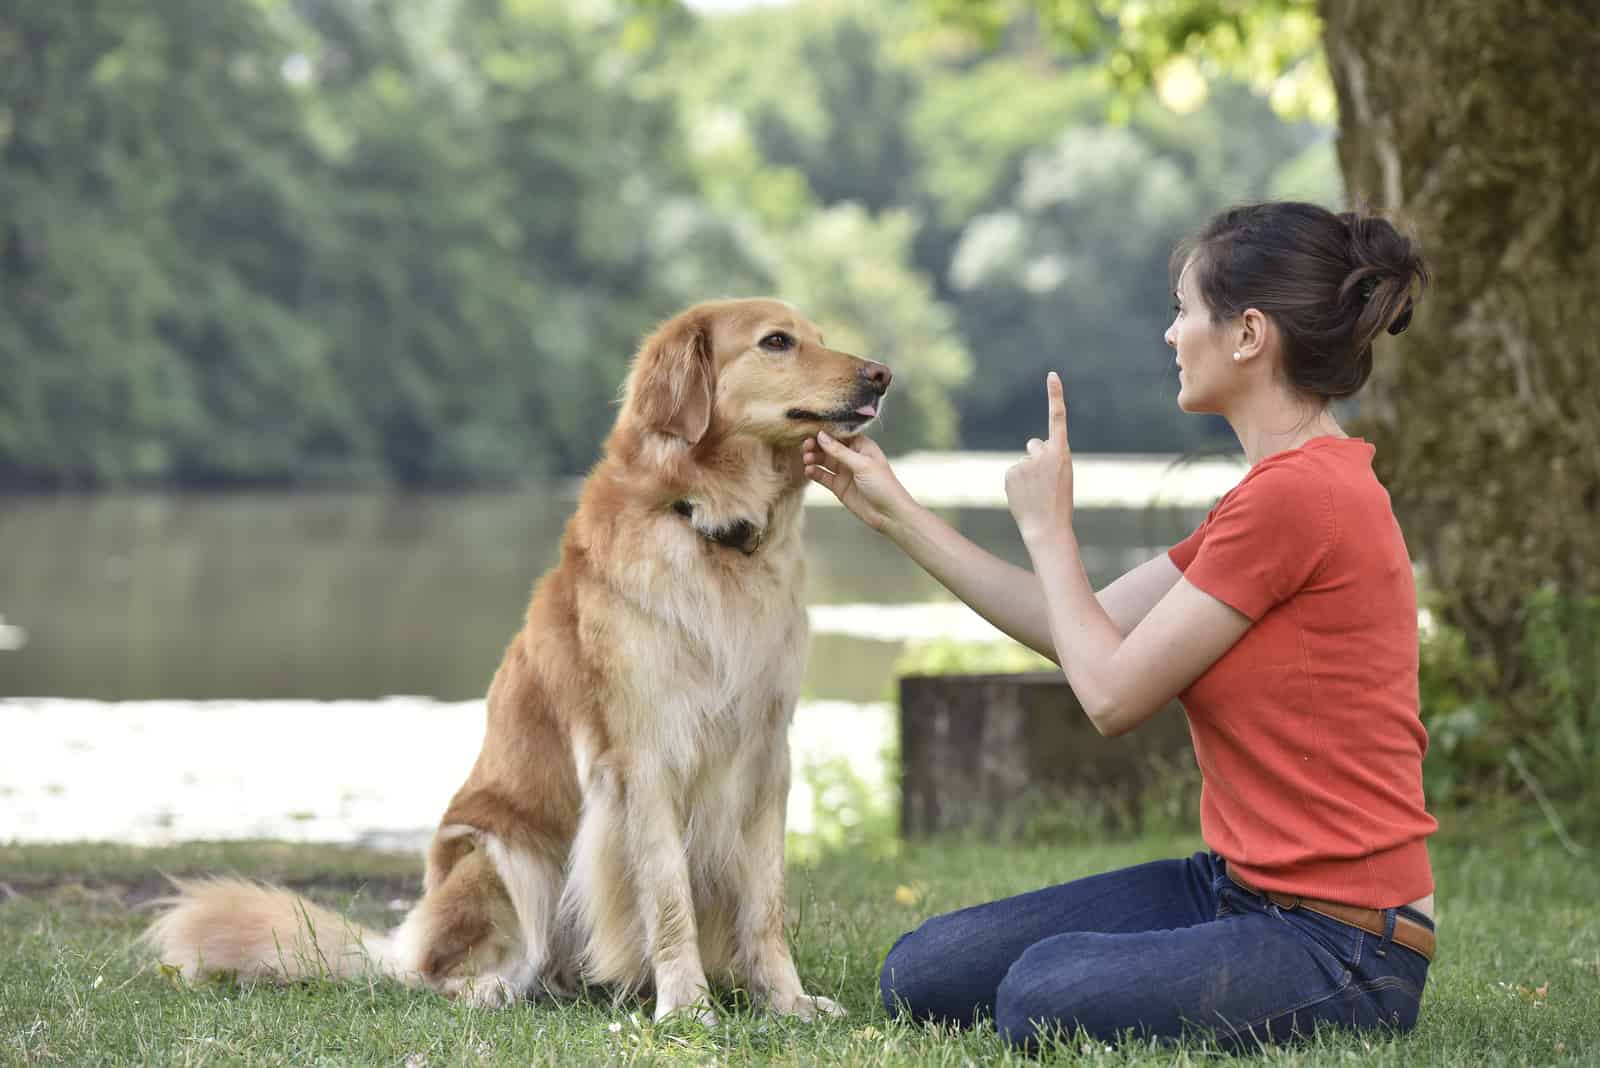 a woman trains a dog in the park